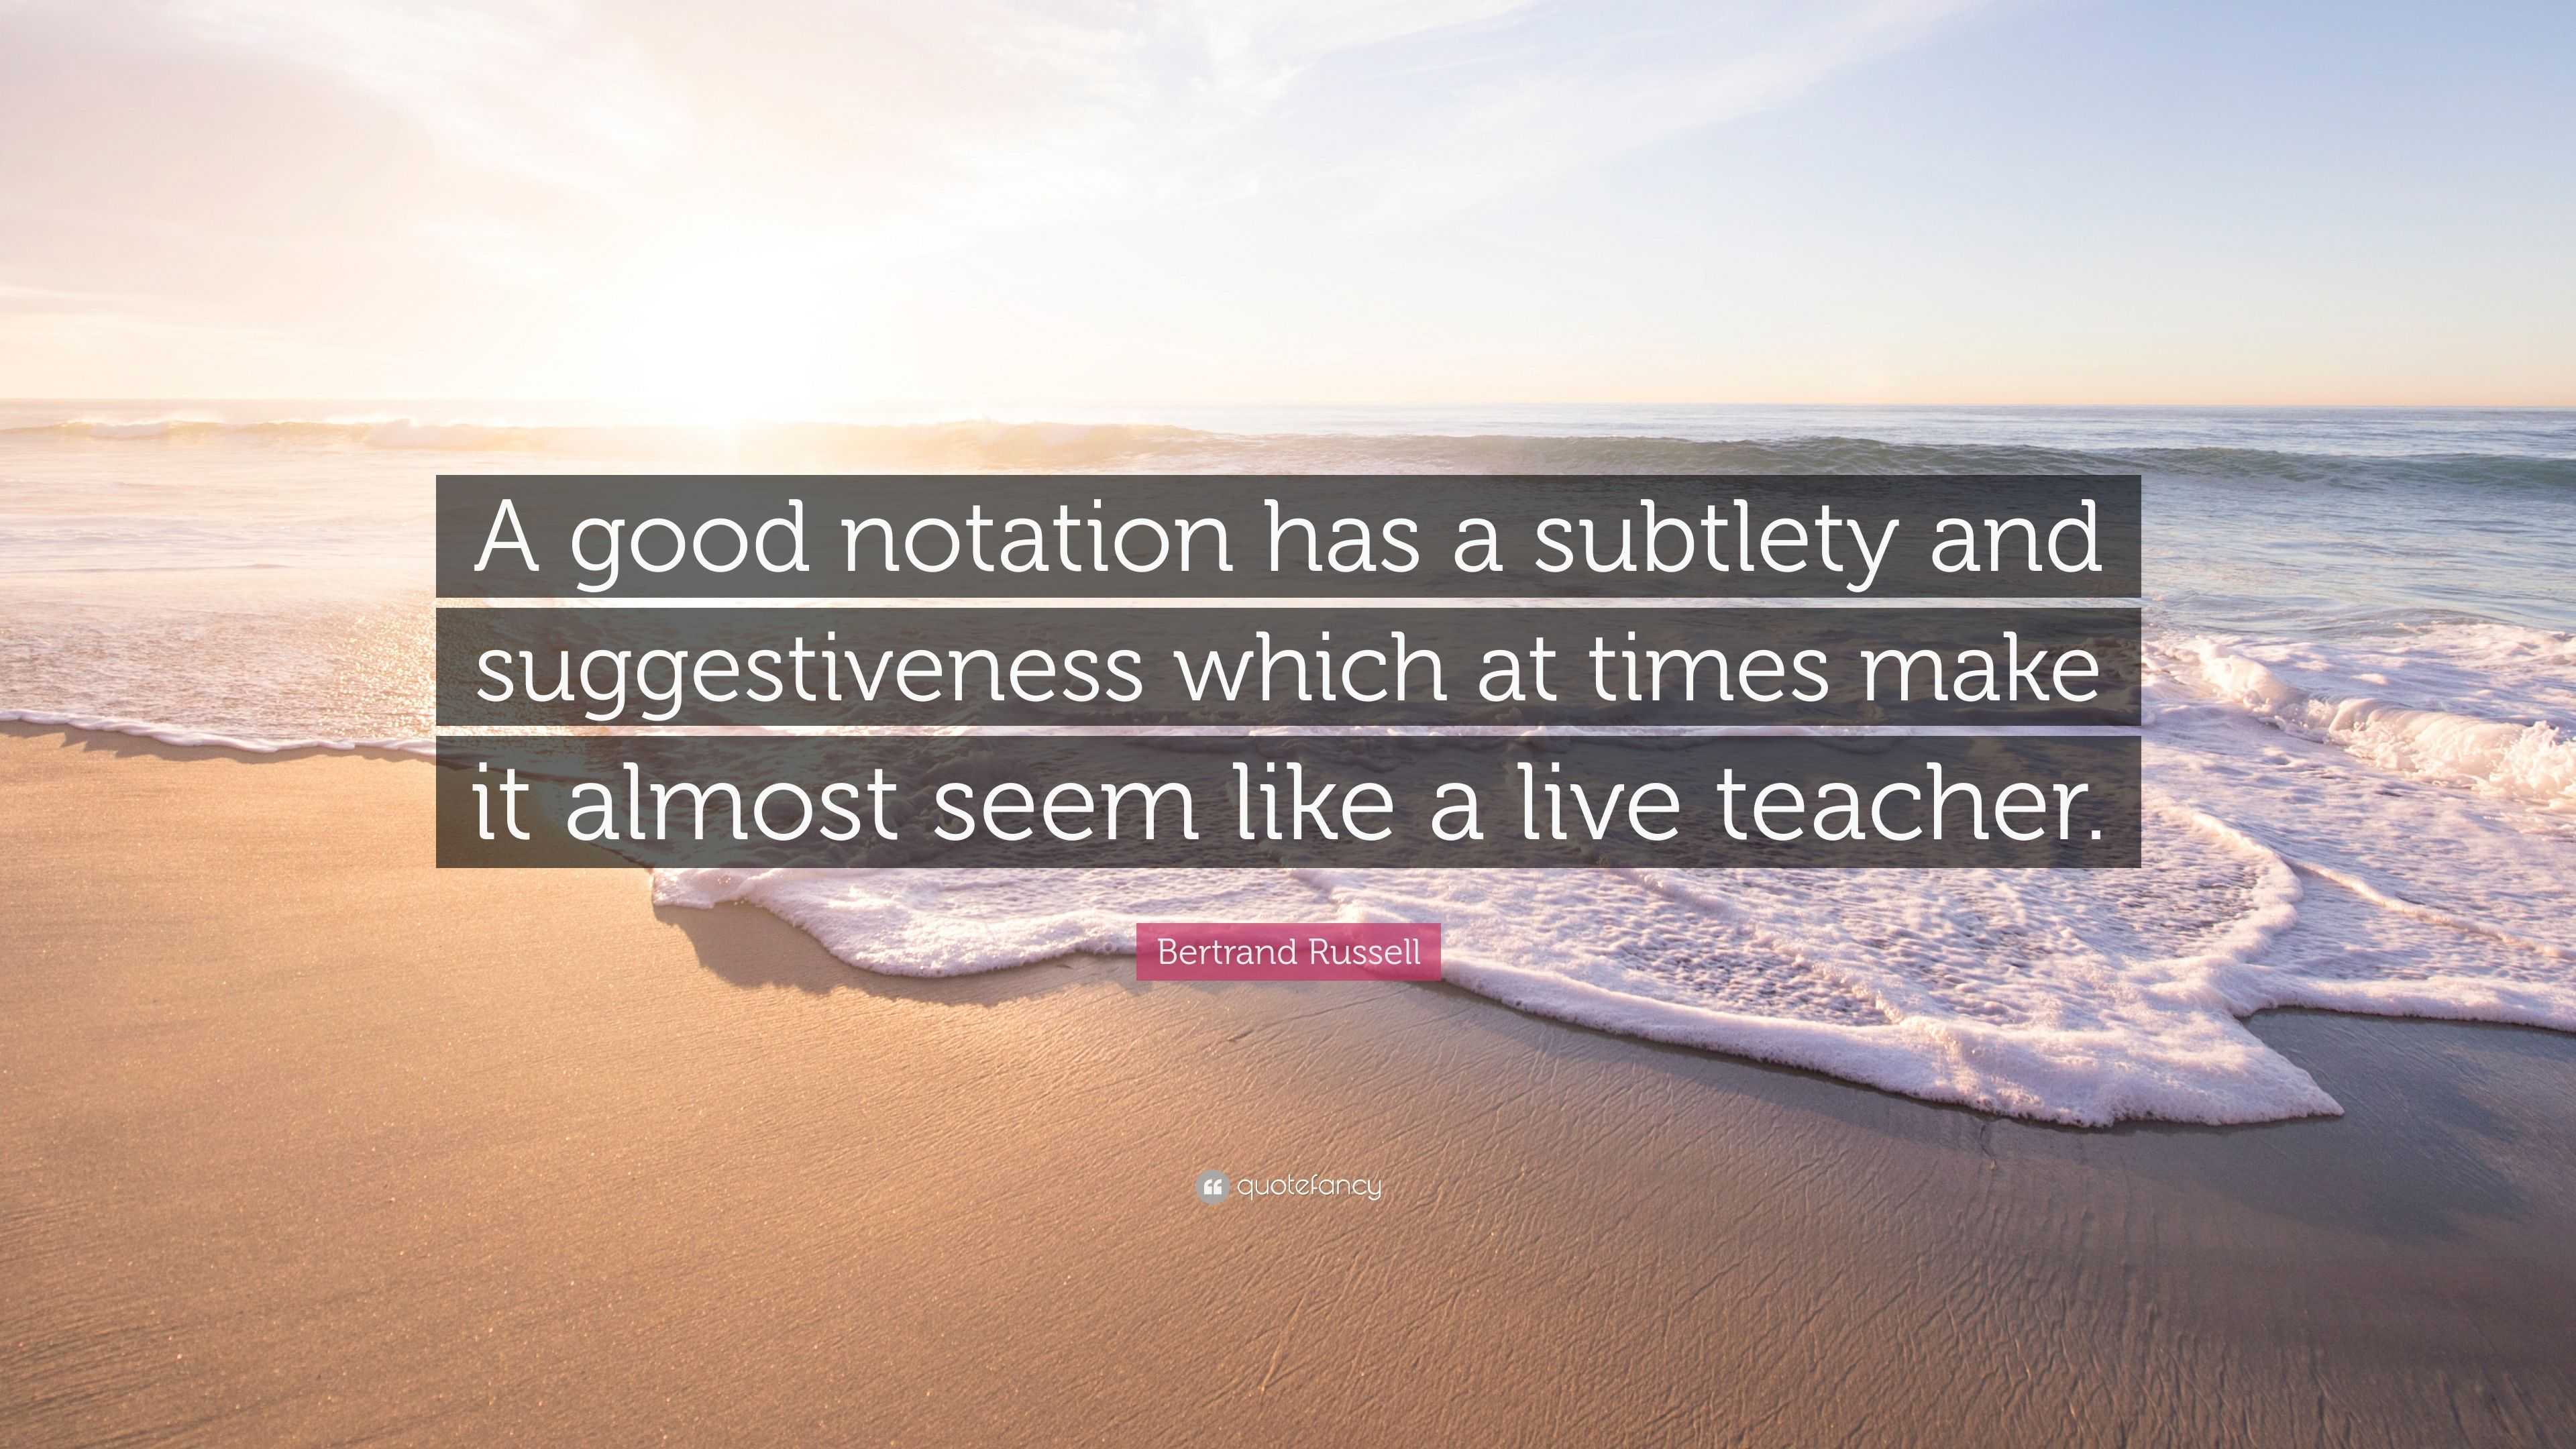 Bertrand Russell Quote: “A good notation has a subtlety and ...